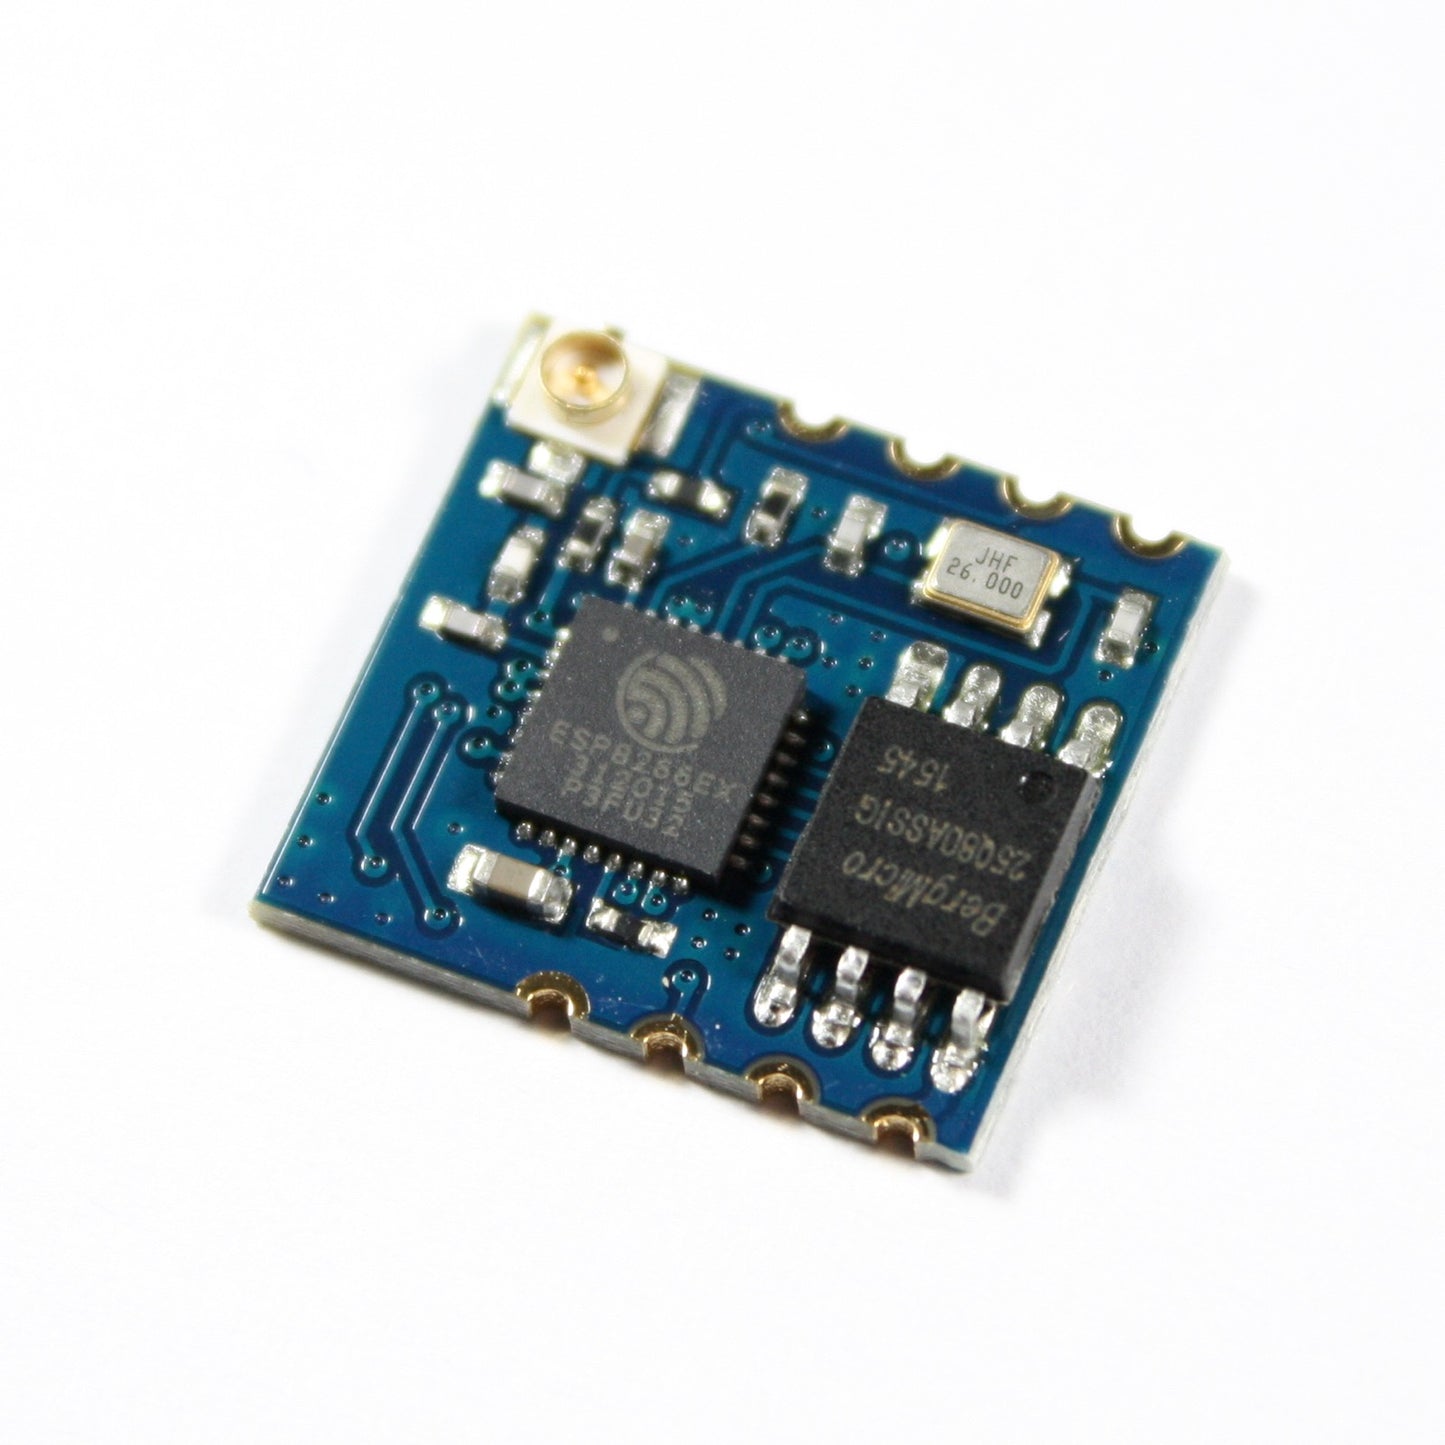 ESP-02 WiFi Module with ESP8266 and Antenna Connector, UART, SPI